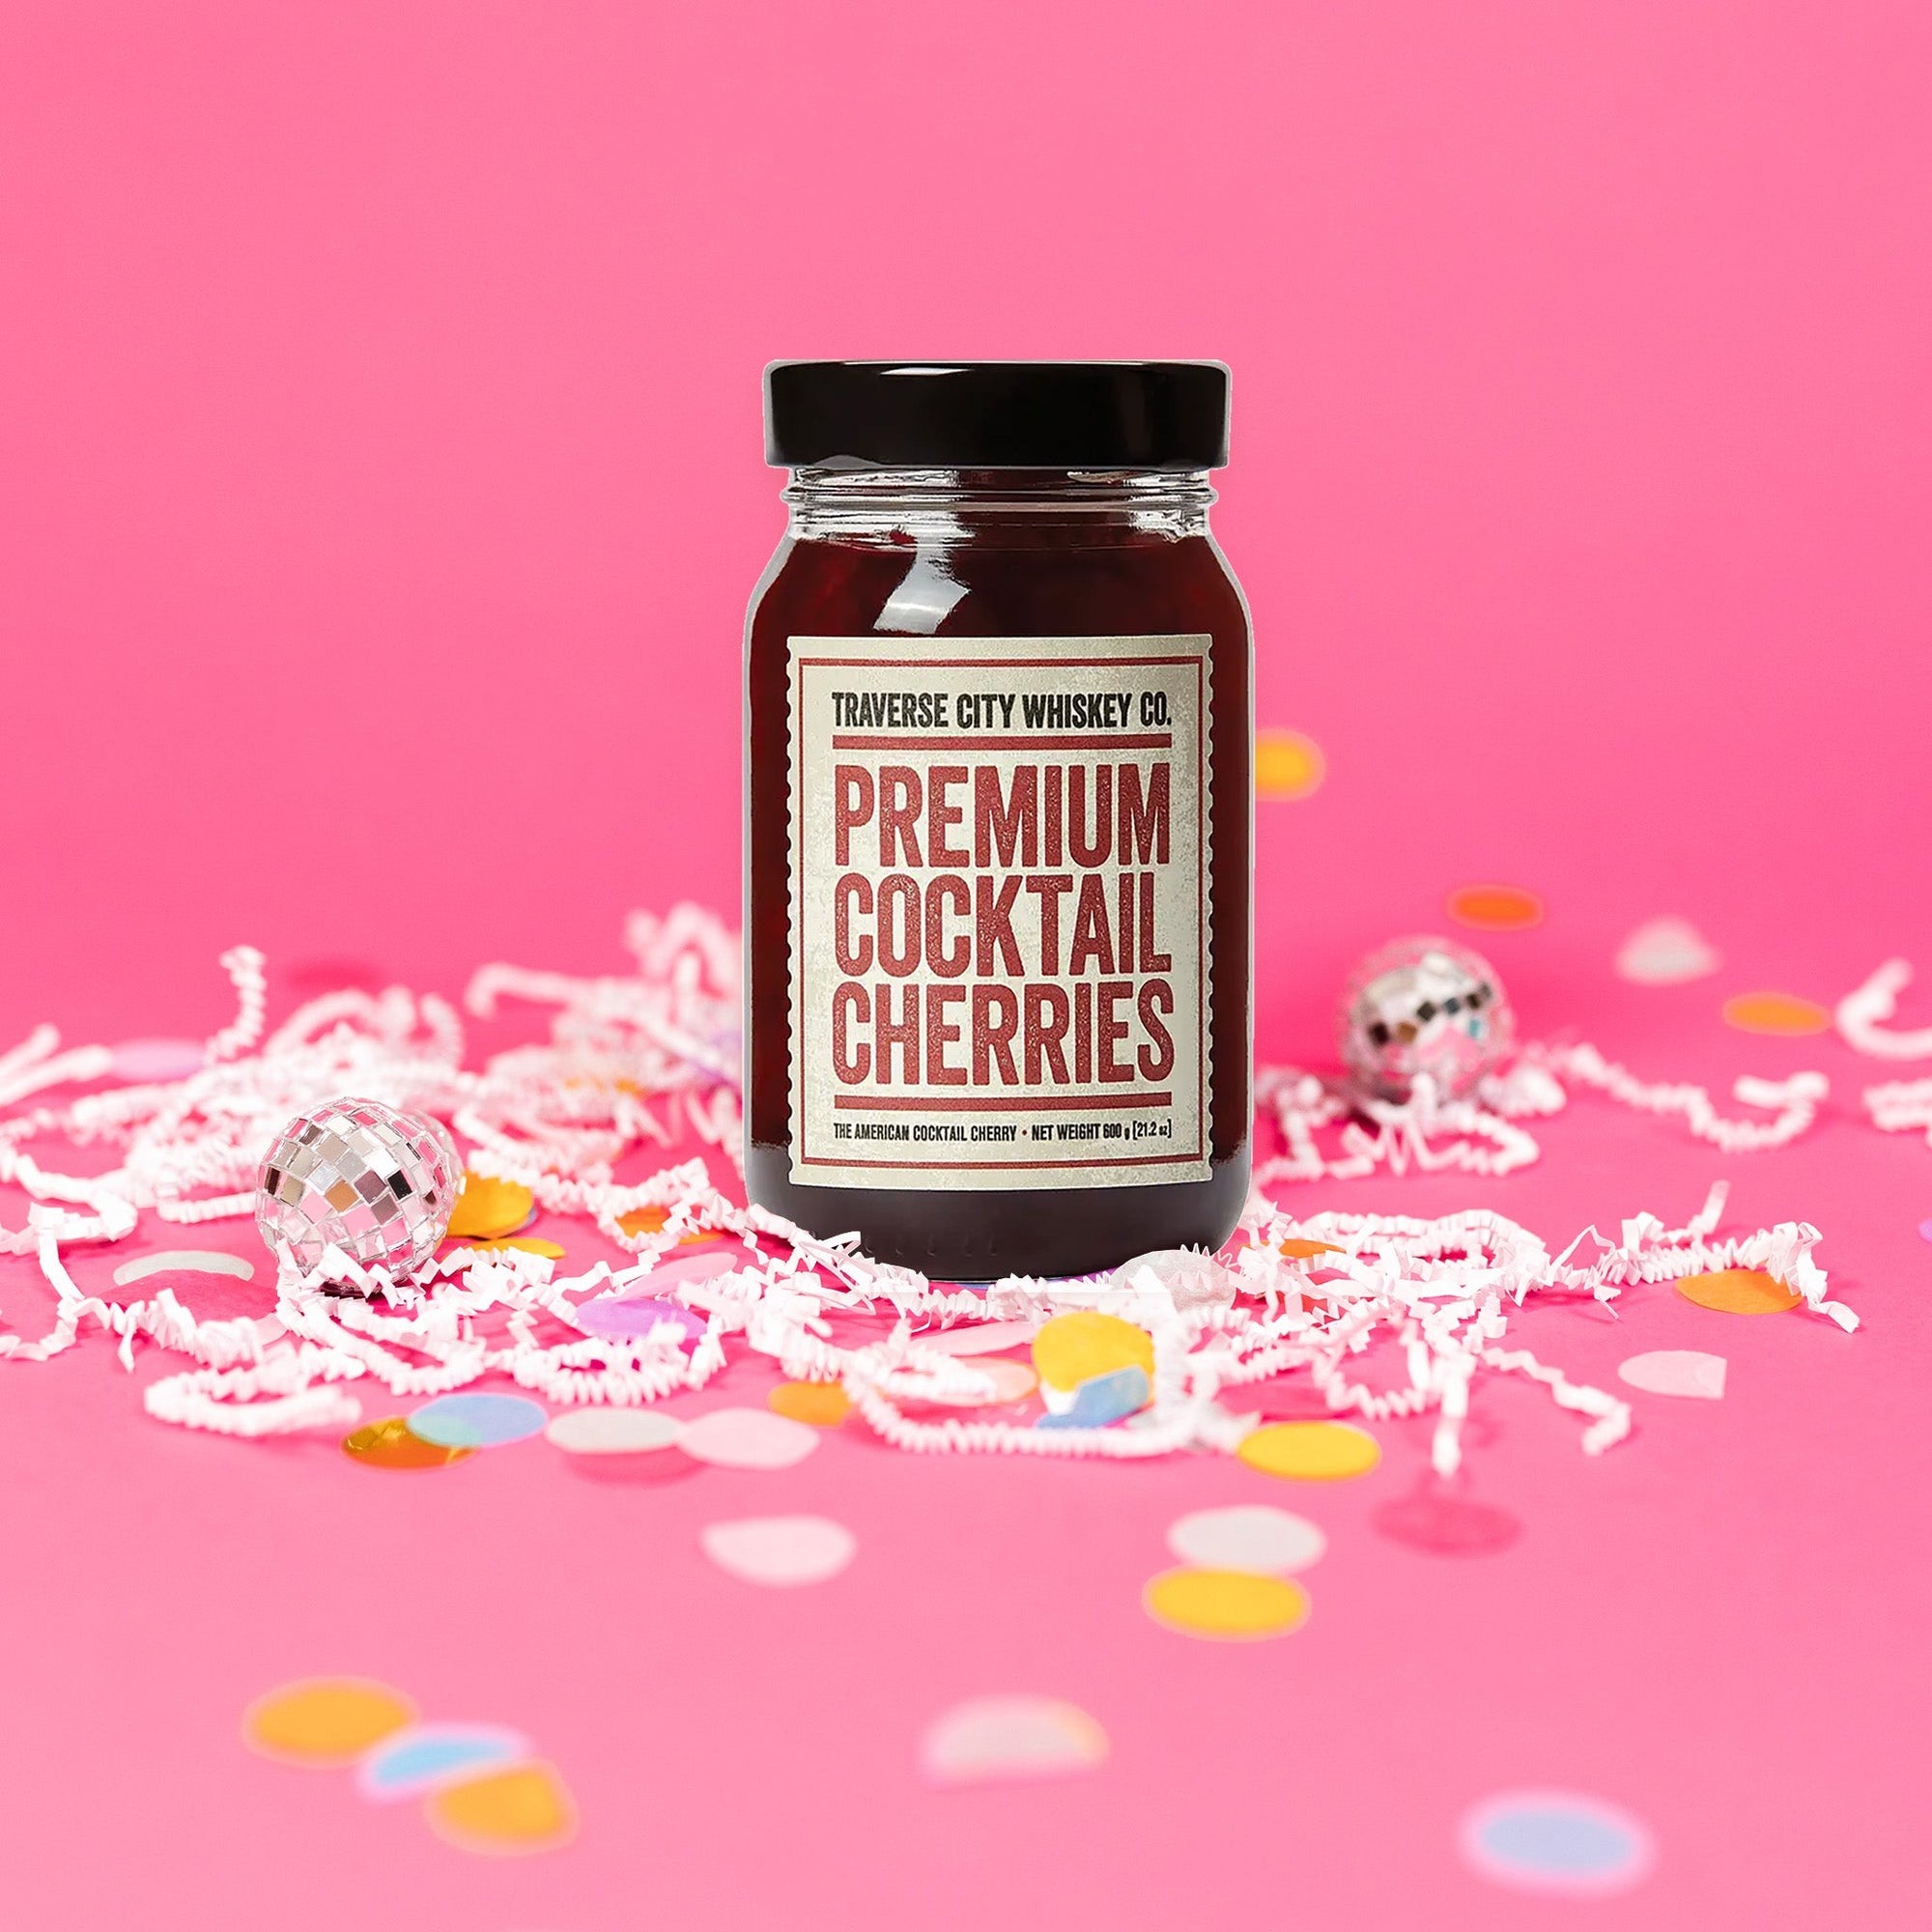 On a hot pink background sits a jar with white crinkle and big, colorful confetti. There are mini disco balls. The jar has a vintage creamy label that says "TRAVERSE CITY WHISKEY CO." in black, all caps block font. Under it is a red line and it says "PREMIUM COCKTAIL CHERRIES" in a red, all caps block font. There is another red line under that and then it says "THE AMERICAN COCKTAIL CHERRY • NET WEIGHT 600 g (21.2 oz)."